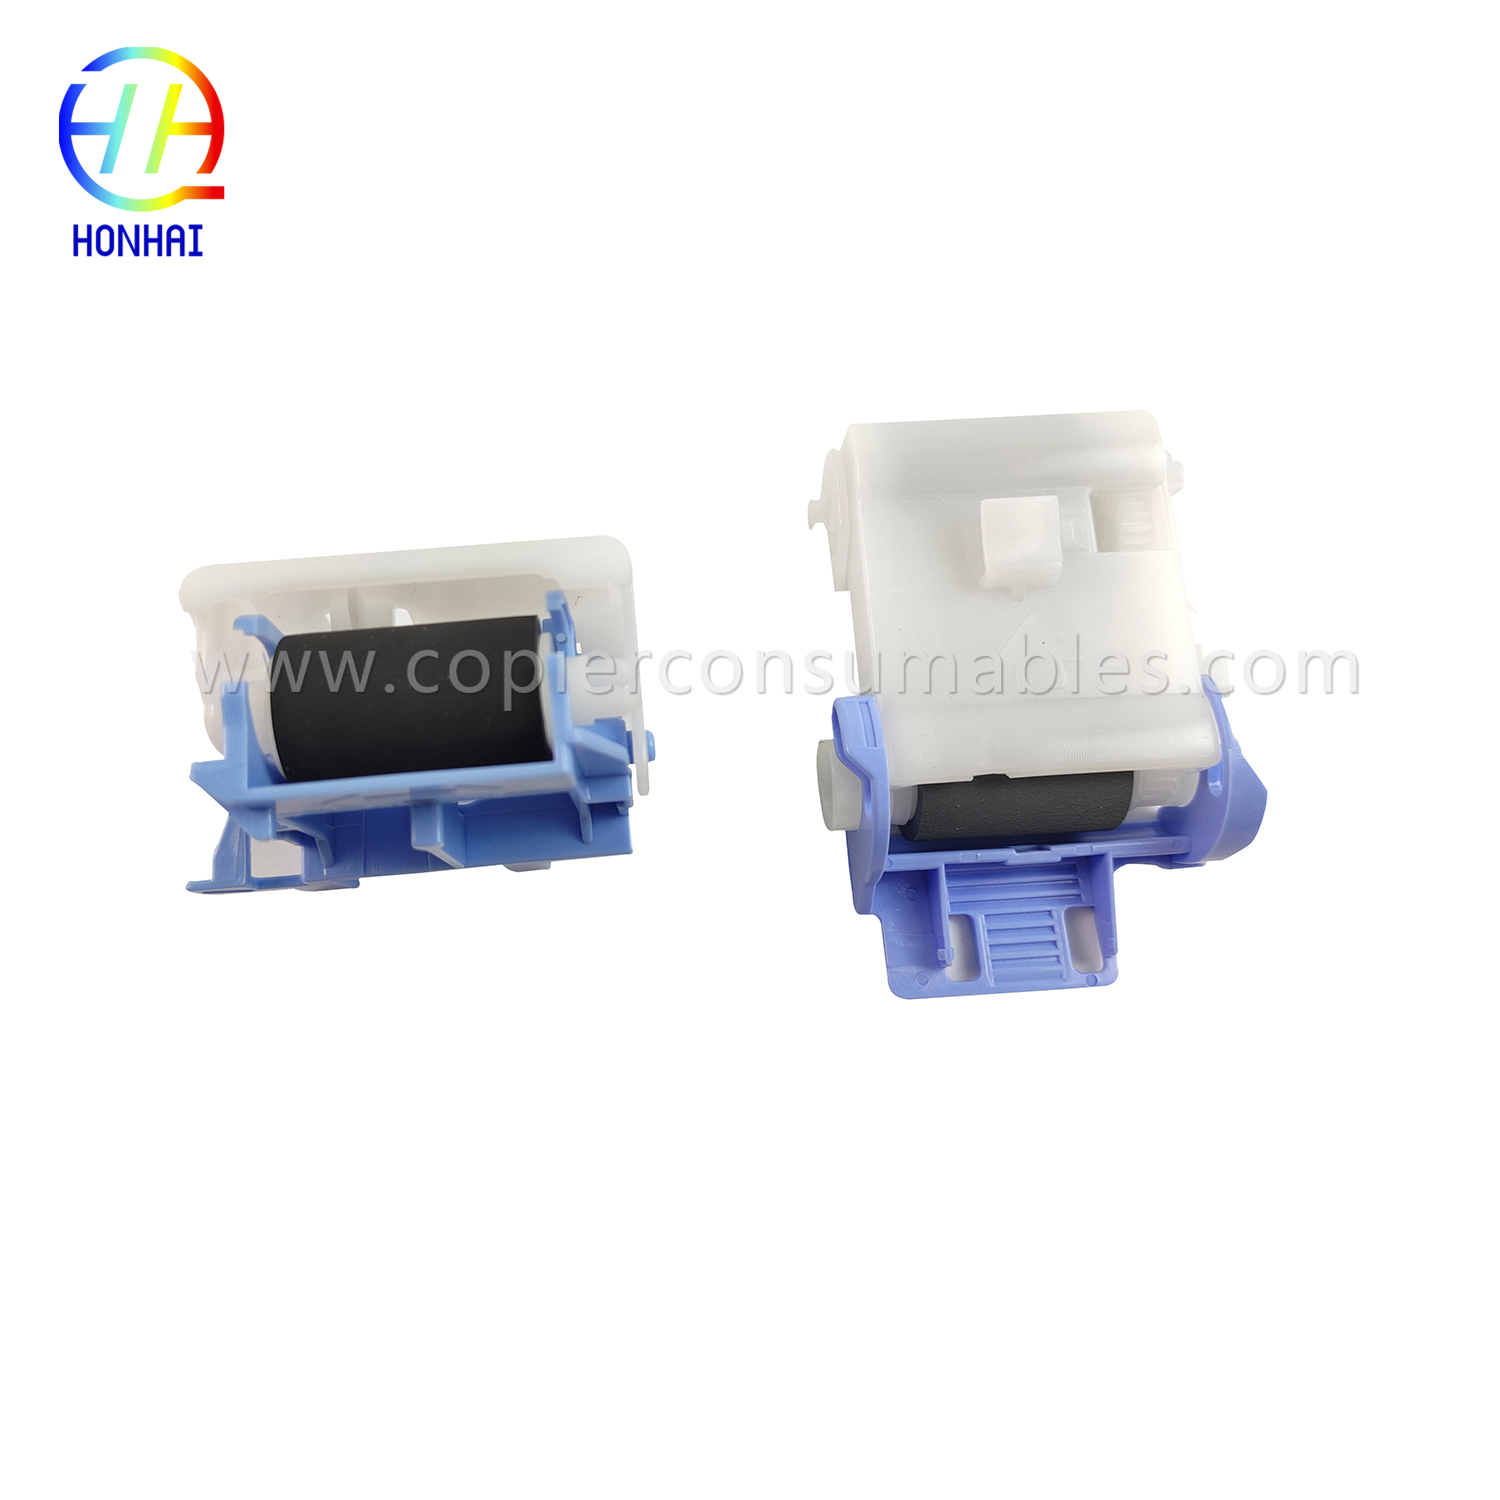 Separation-&-Pickup-Feed-Assemblys,-Tray-2-for-HP-Laserjet-Enterprise-M607,-Laserjet-Enterprise-M608,-M609,-M631,-M632,-M633-J8J70-（170 ）-(2) 拷贝